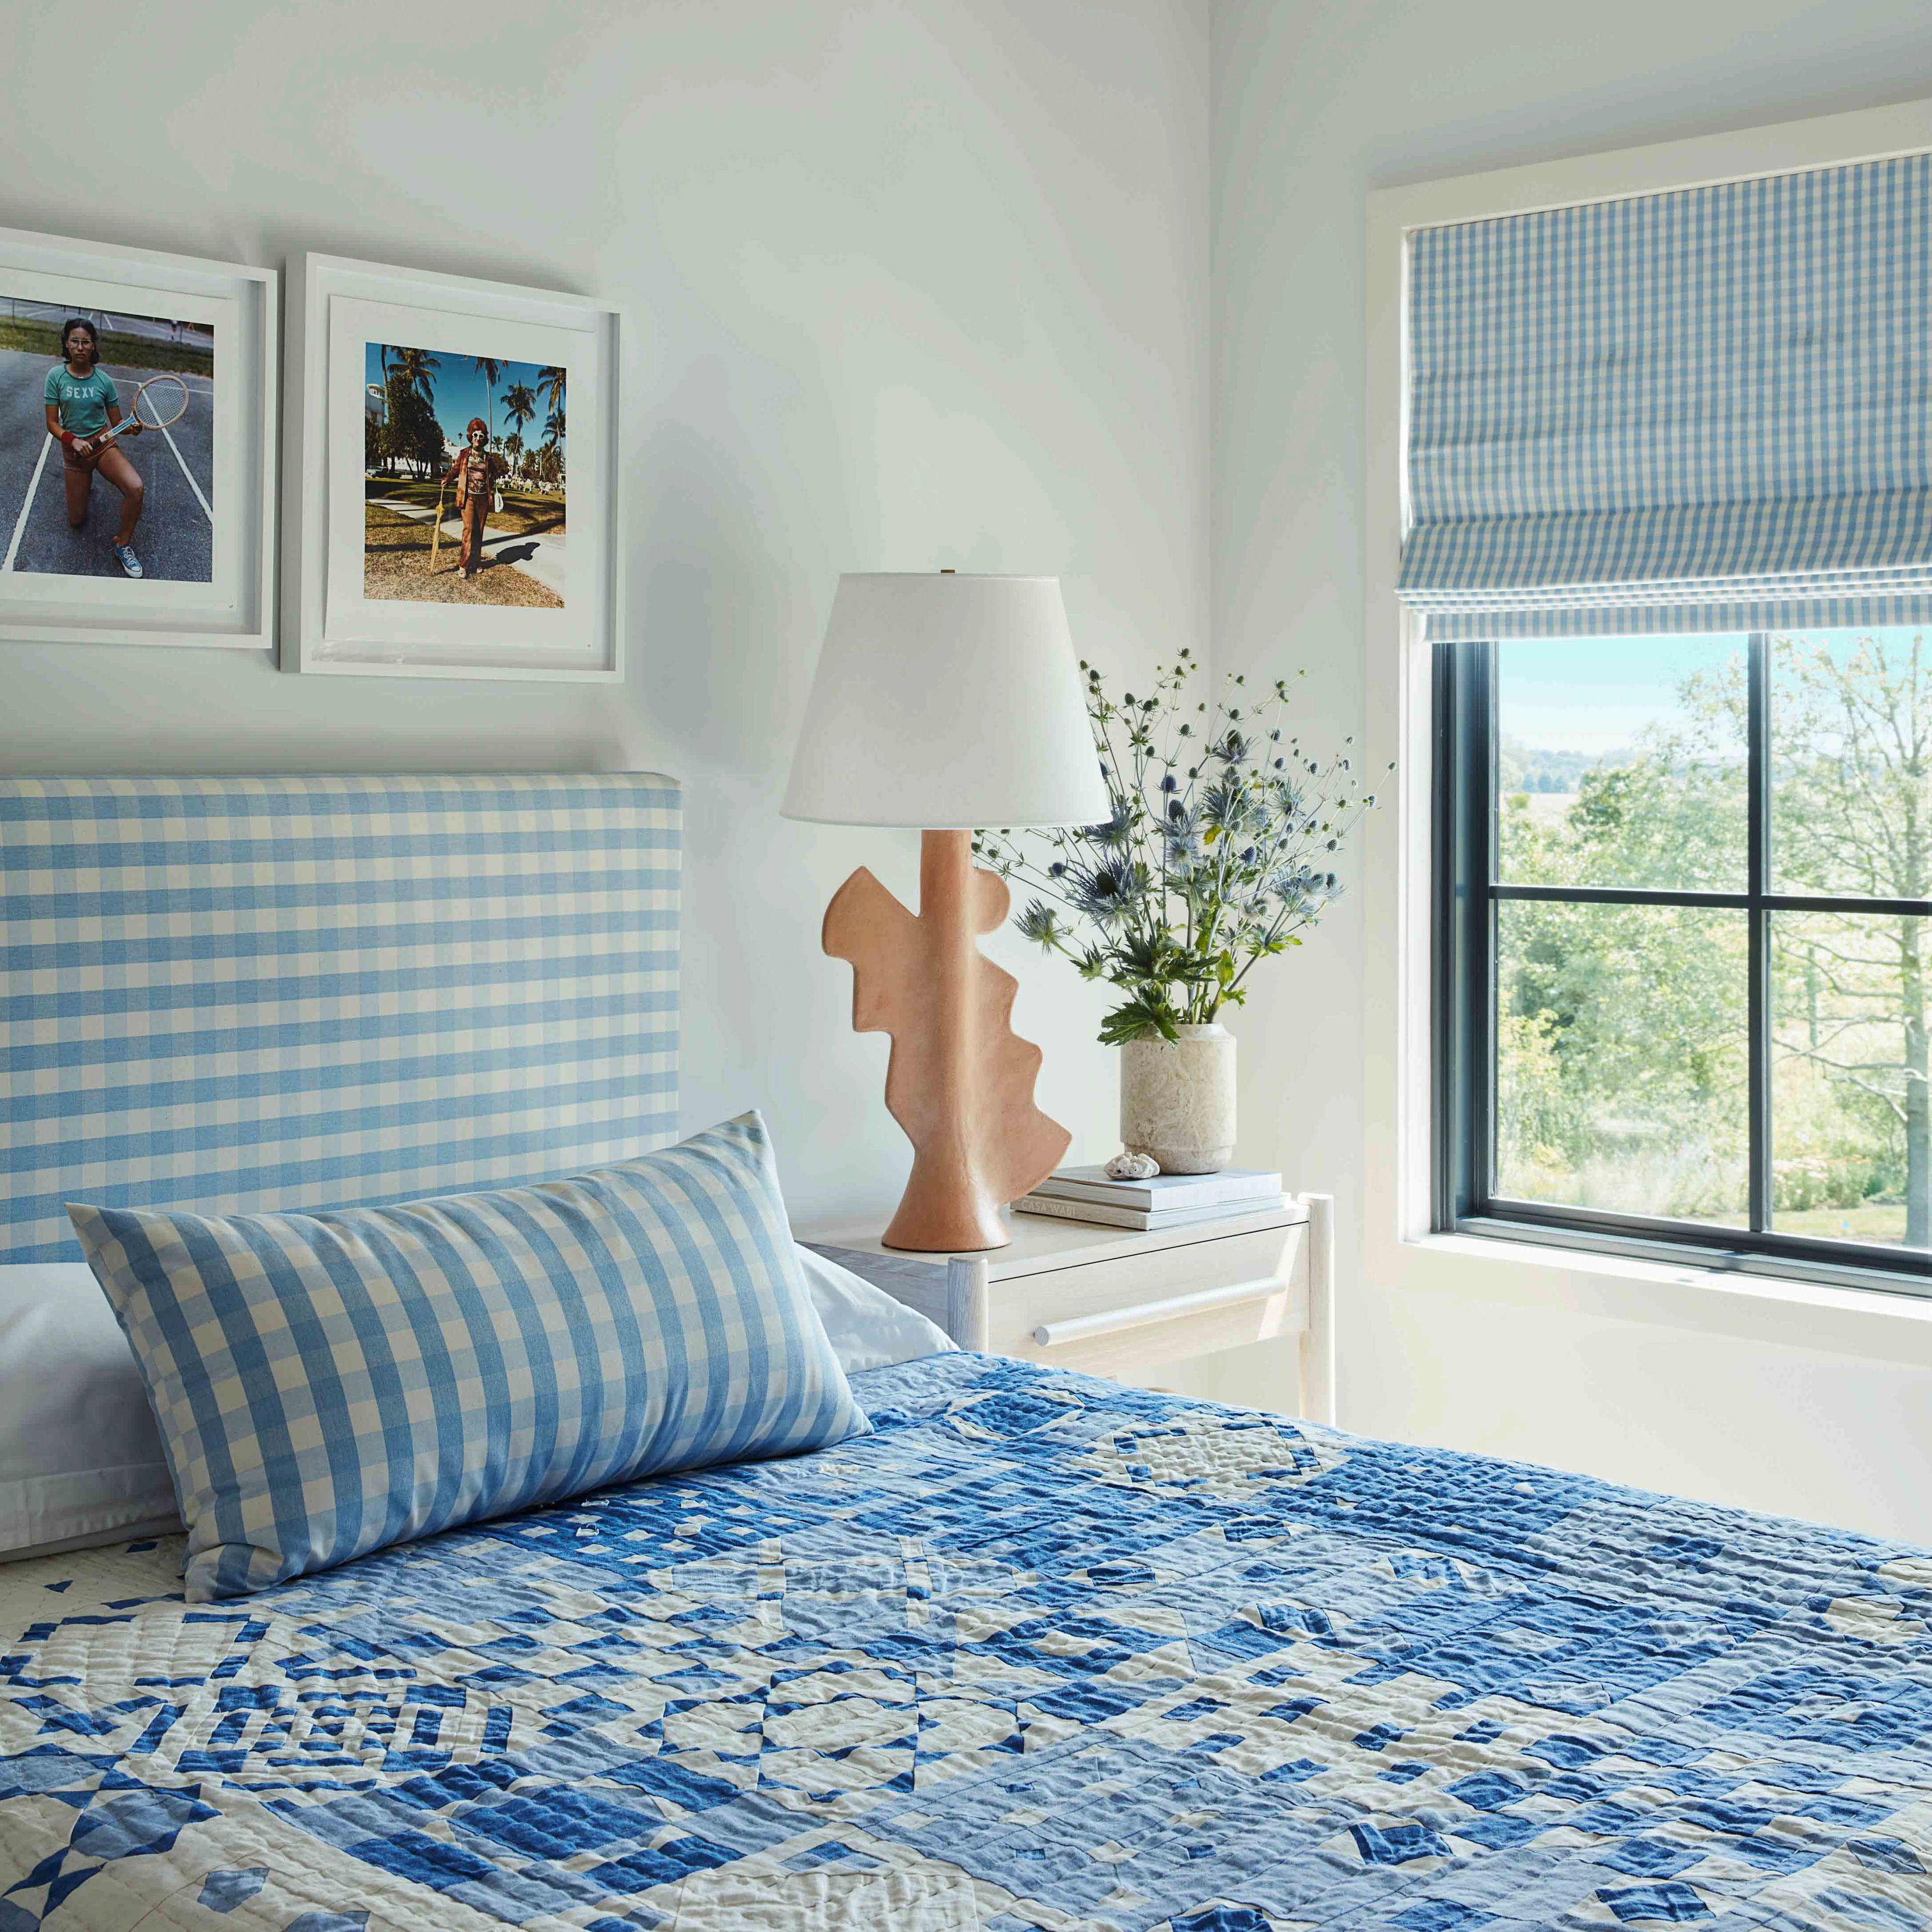 a bed with a blue and white bedspread next to a window